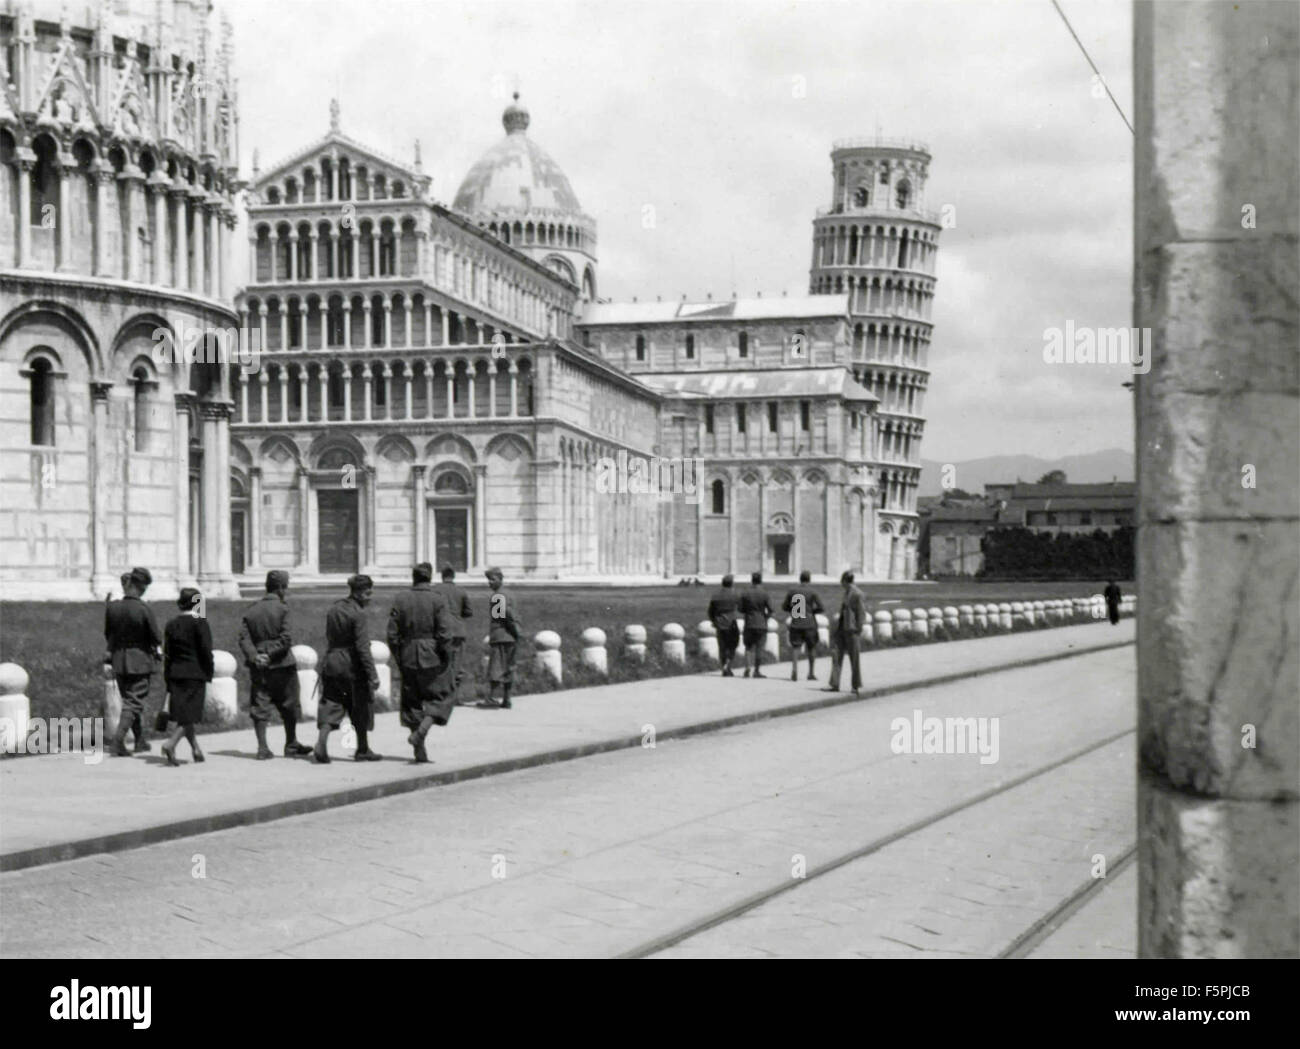 Soldiers walking near the Baptistery, the Cathedral and the Tower of Pisa, Italy Stock Photo